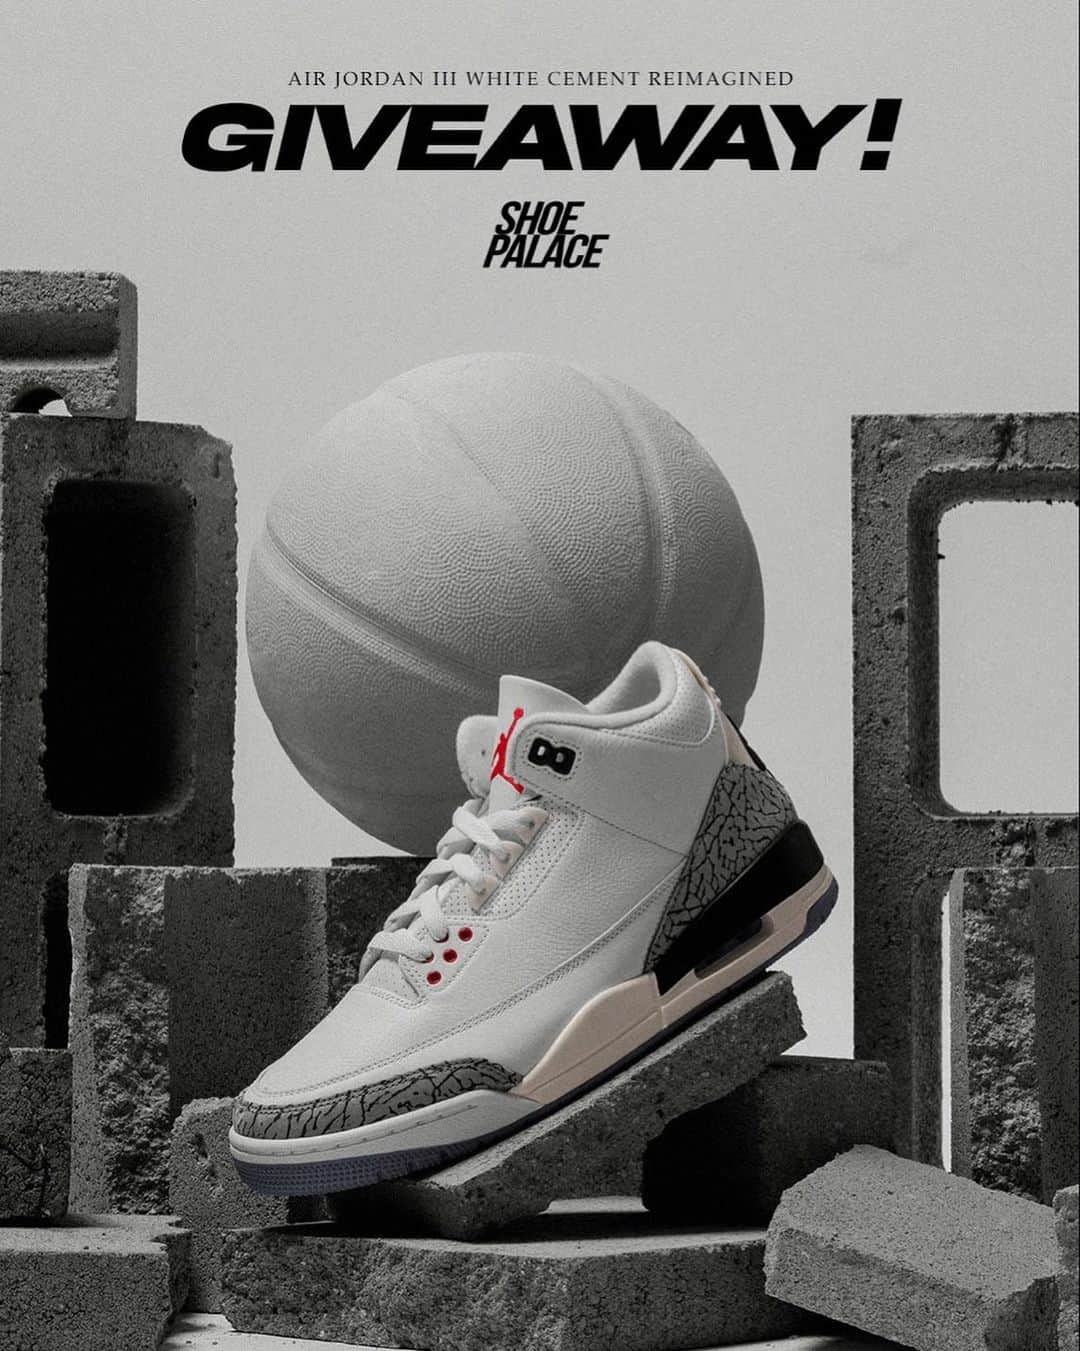 jordandepotのインスタグラム：「🚨 #GIVEAWAY CLOSED🚨   We’re giving away one (1) pair of Men’s Air Jordan 3 Retro 'White Cement Reimagined'! See instructions below to enter:   1. Like this post 2. Follow @shoepalace and @jordandepot on IG 3. Comment your shoe size and tag three friends   Giveaway is open to U.S. residents only and ends Tuesday 3.7.2023 at 7PM PST. All communication will come from @shoepalace only. The randomly selected winner will be notified via DM and will have 24 hours to respond. Good luck!  Winner: @j3an0」